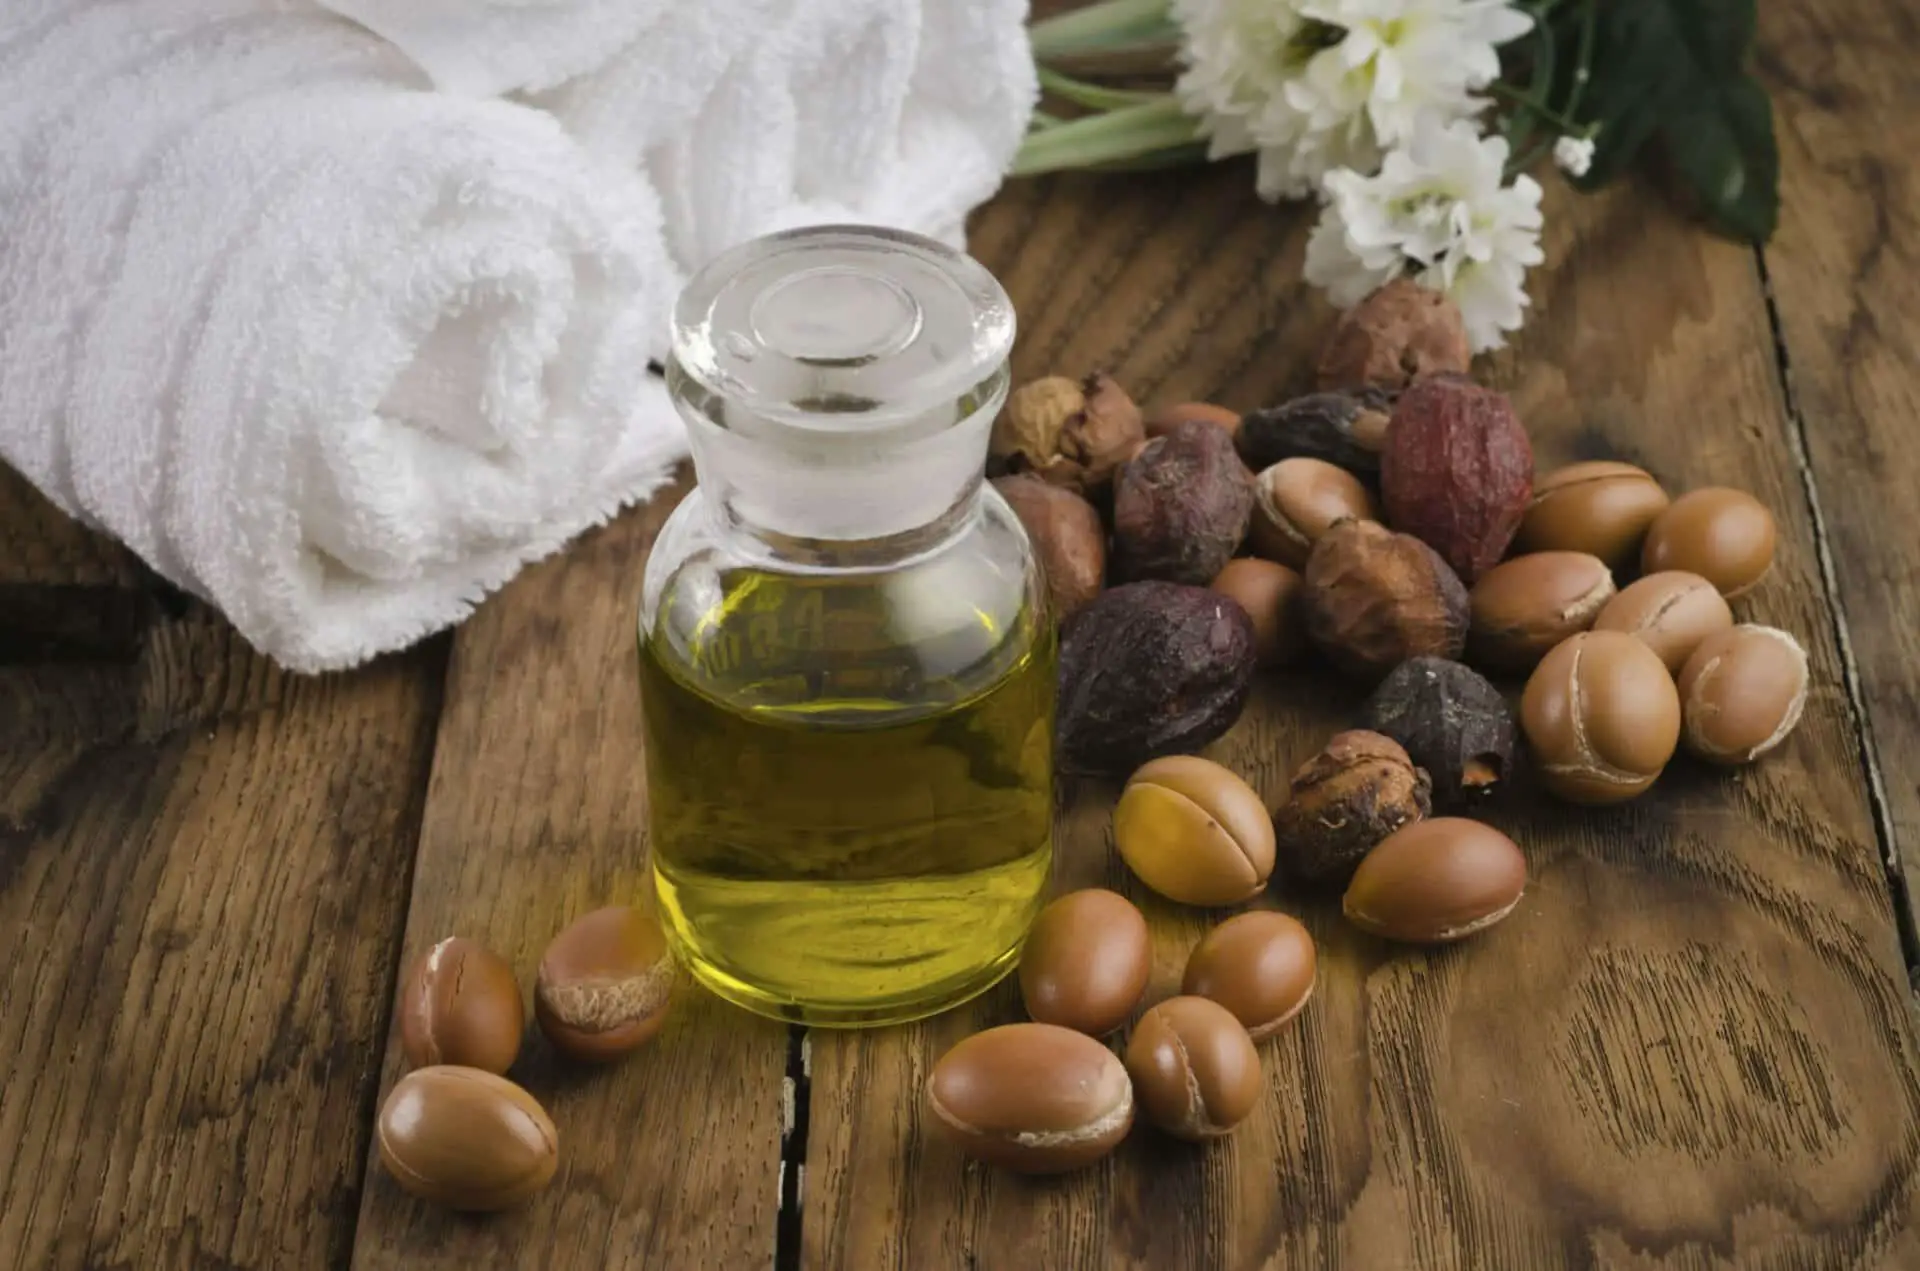  Conclusion -How often should you use argan oil on your hair?